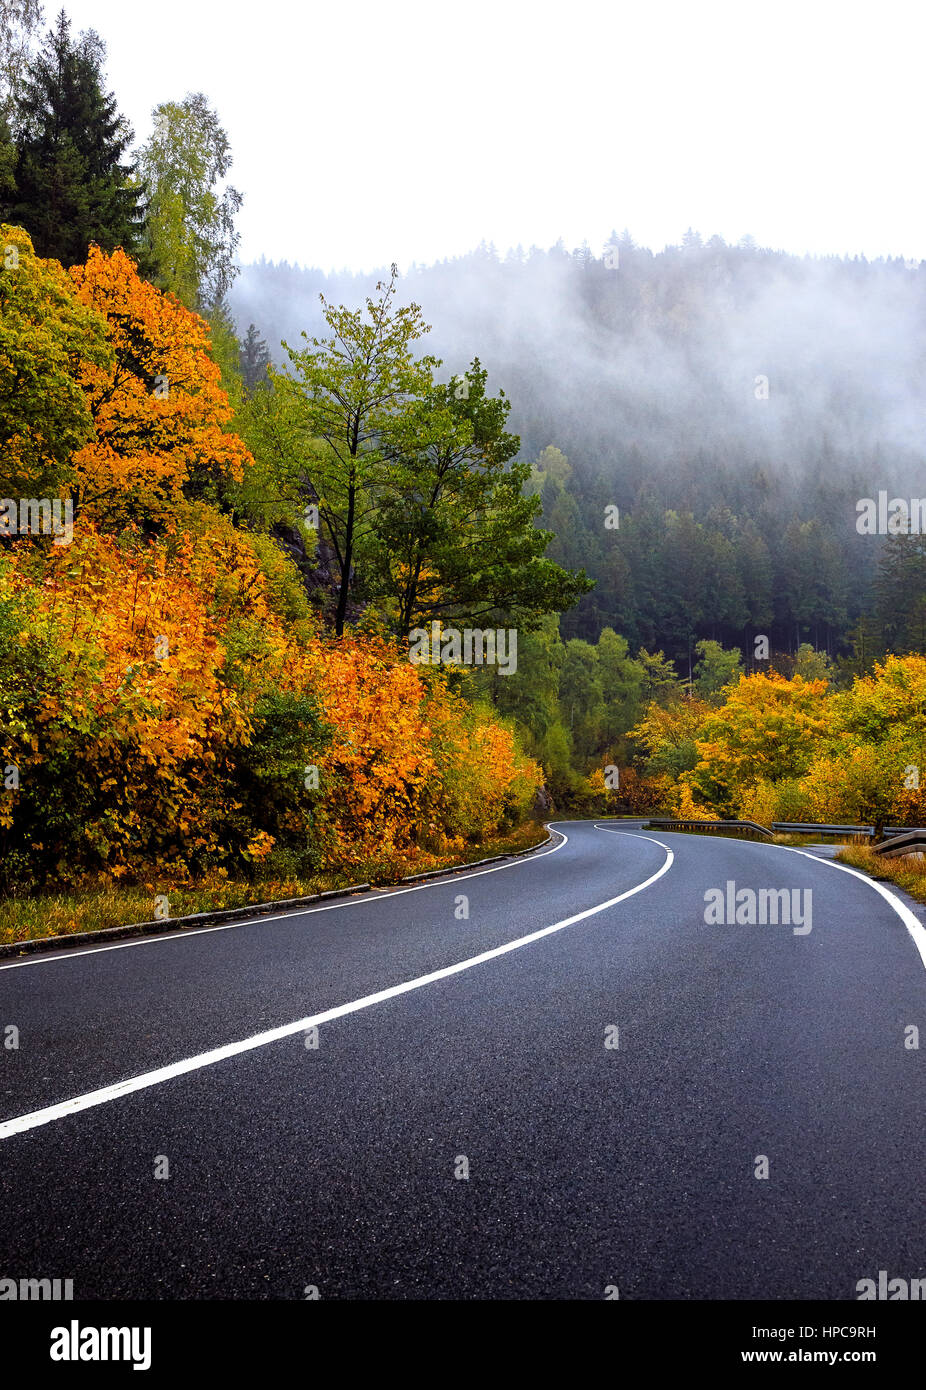 The Harz is the highest mountain range in Northern Germany and its rugged terrain extends across parts of Lower Saxony, Saxony-Anhalt, and Thuringia.  Stock Photo